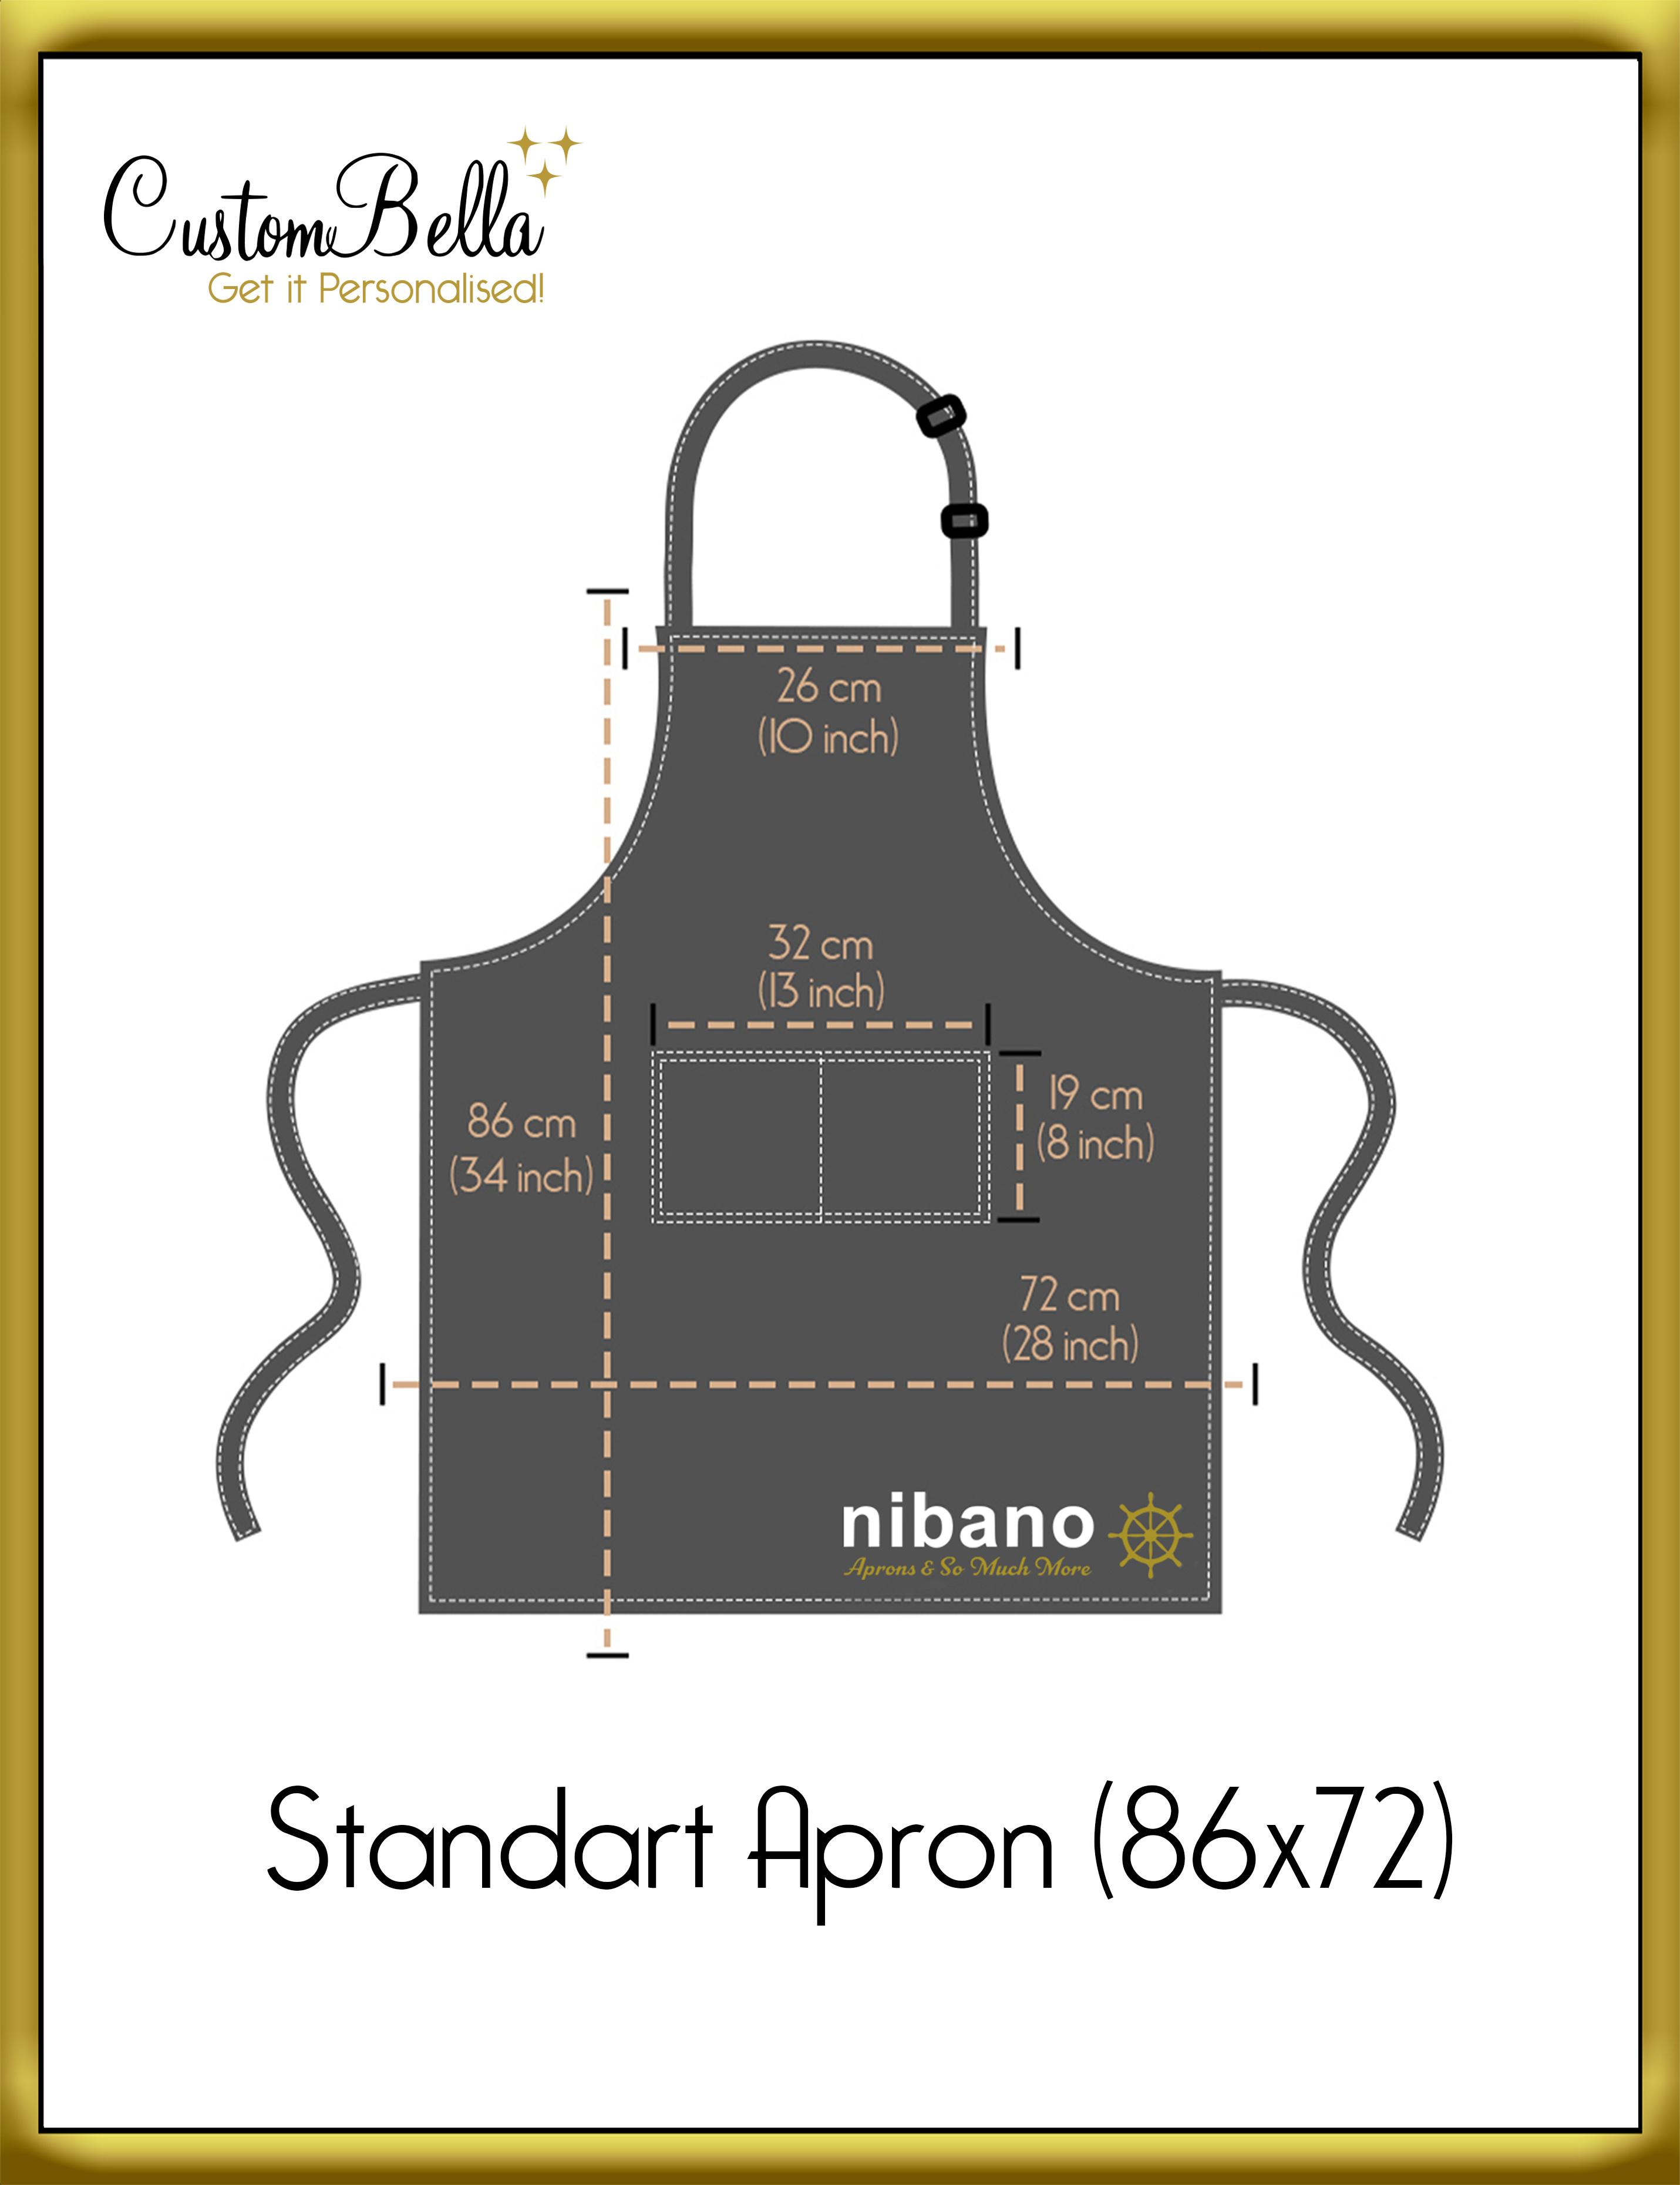 Personalised embroidered apron dimensions